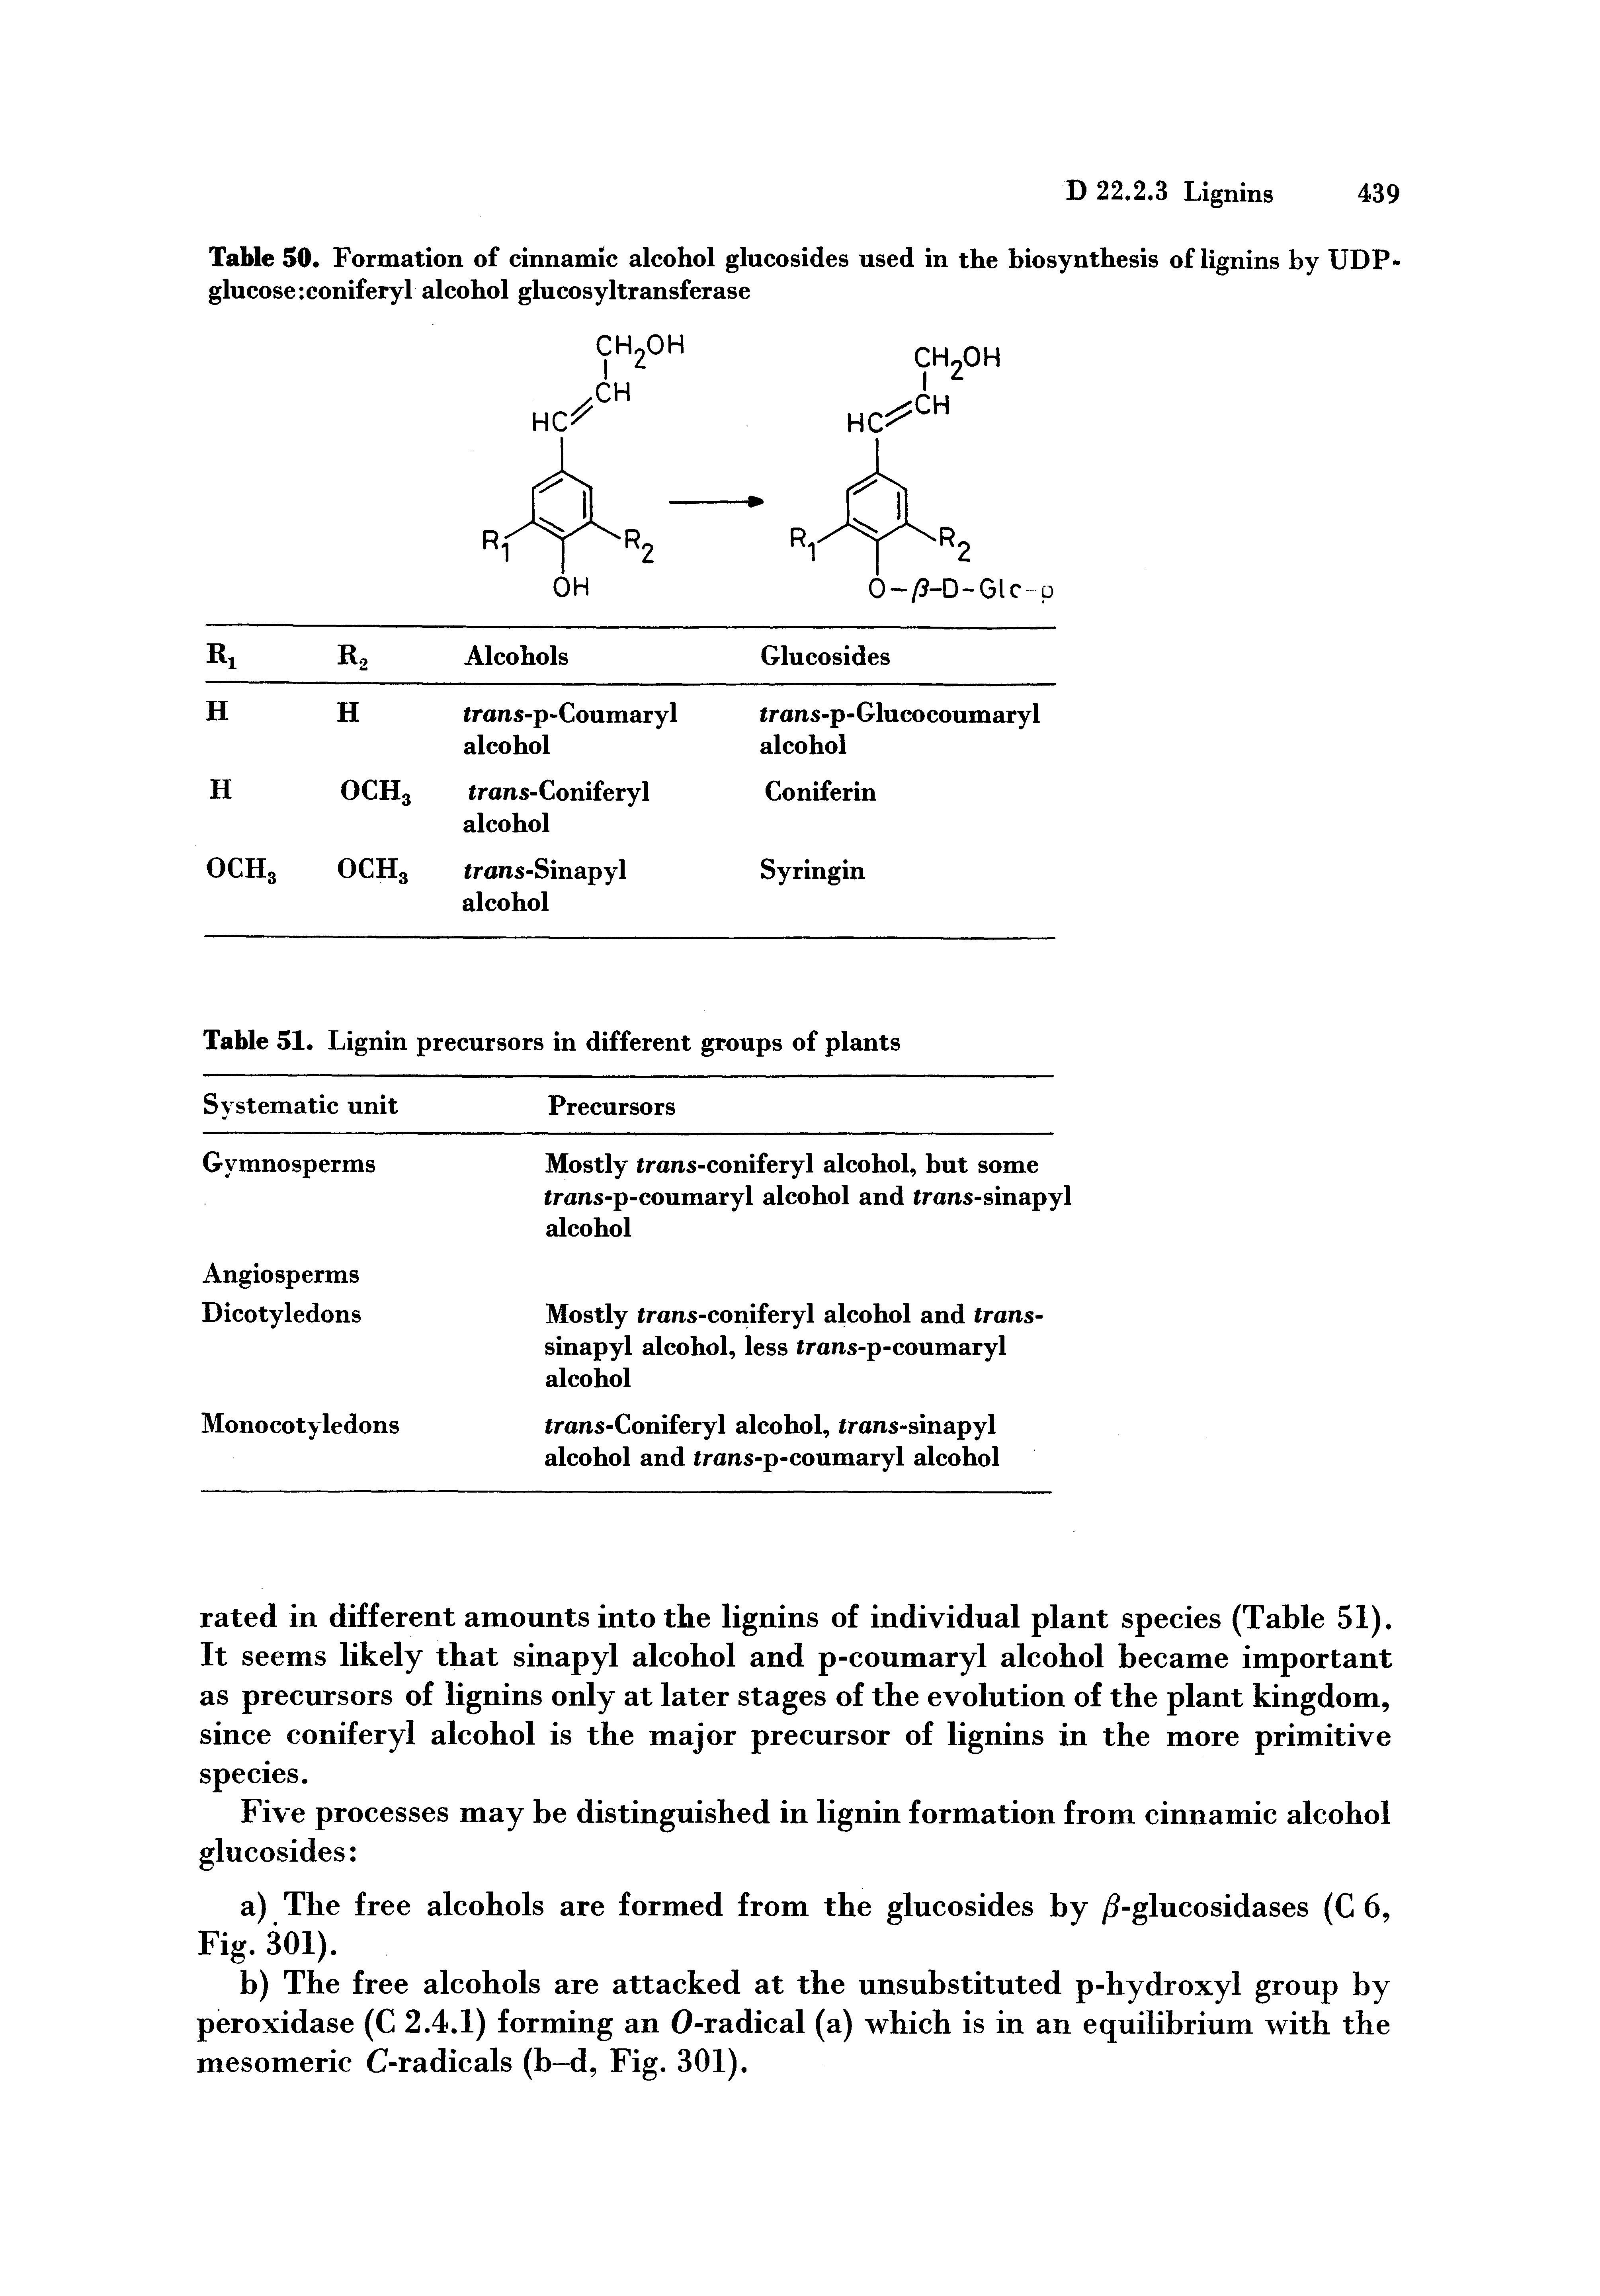 Table 50. Formation of cinnamic alcohol glucosides used in the biosynthesis of lignins by UDP-glucose coniferyl alcohol glucosyltransferase...